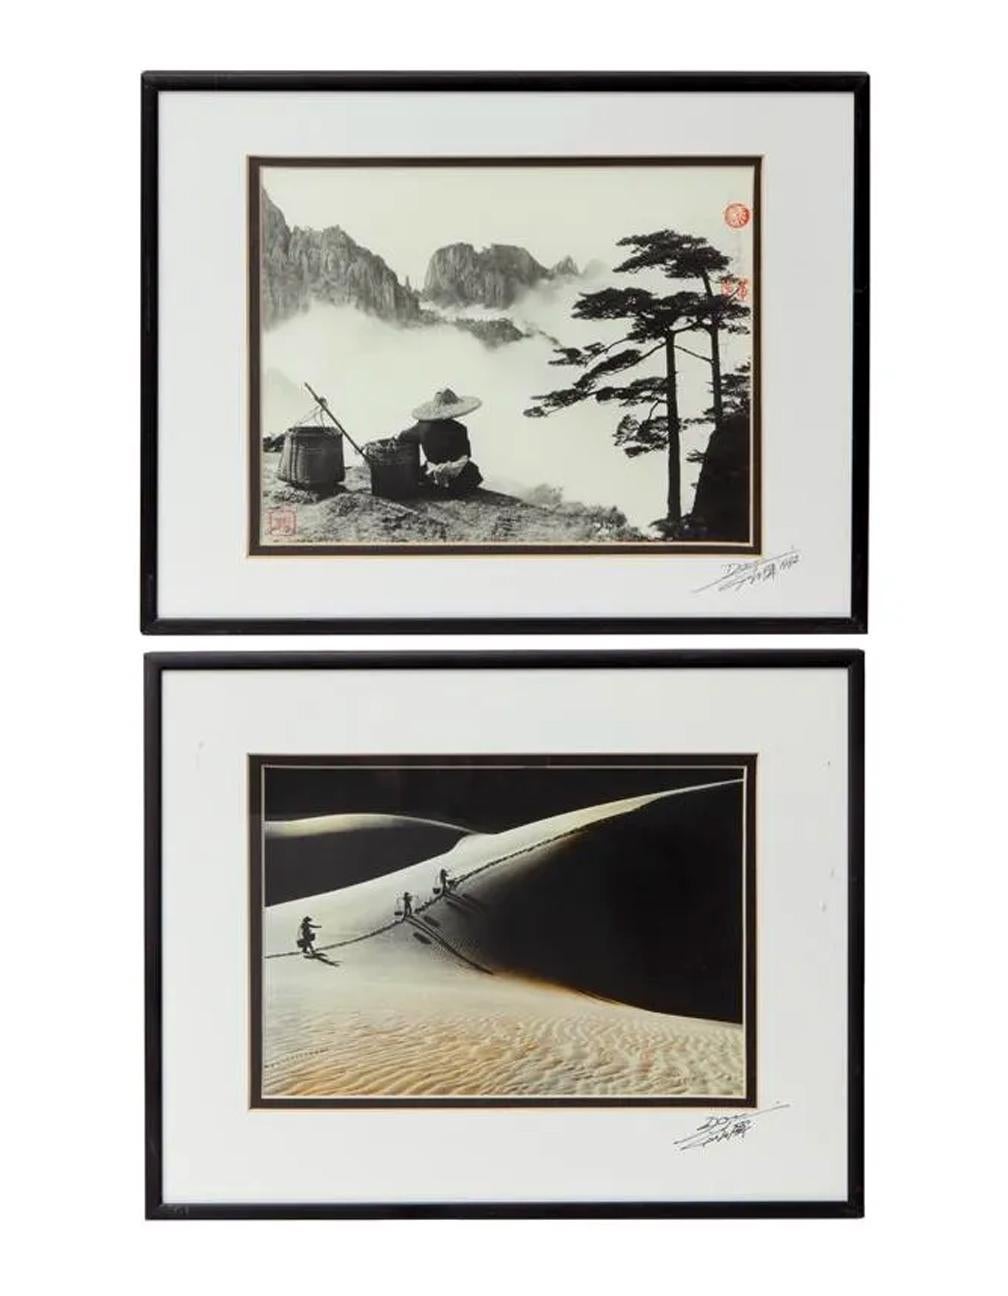 Paper Framed Photograph by Don Hong-Oai For Sale